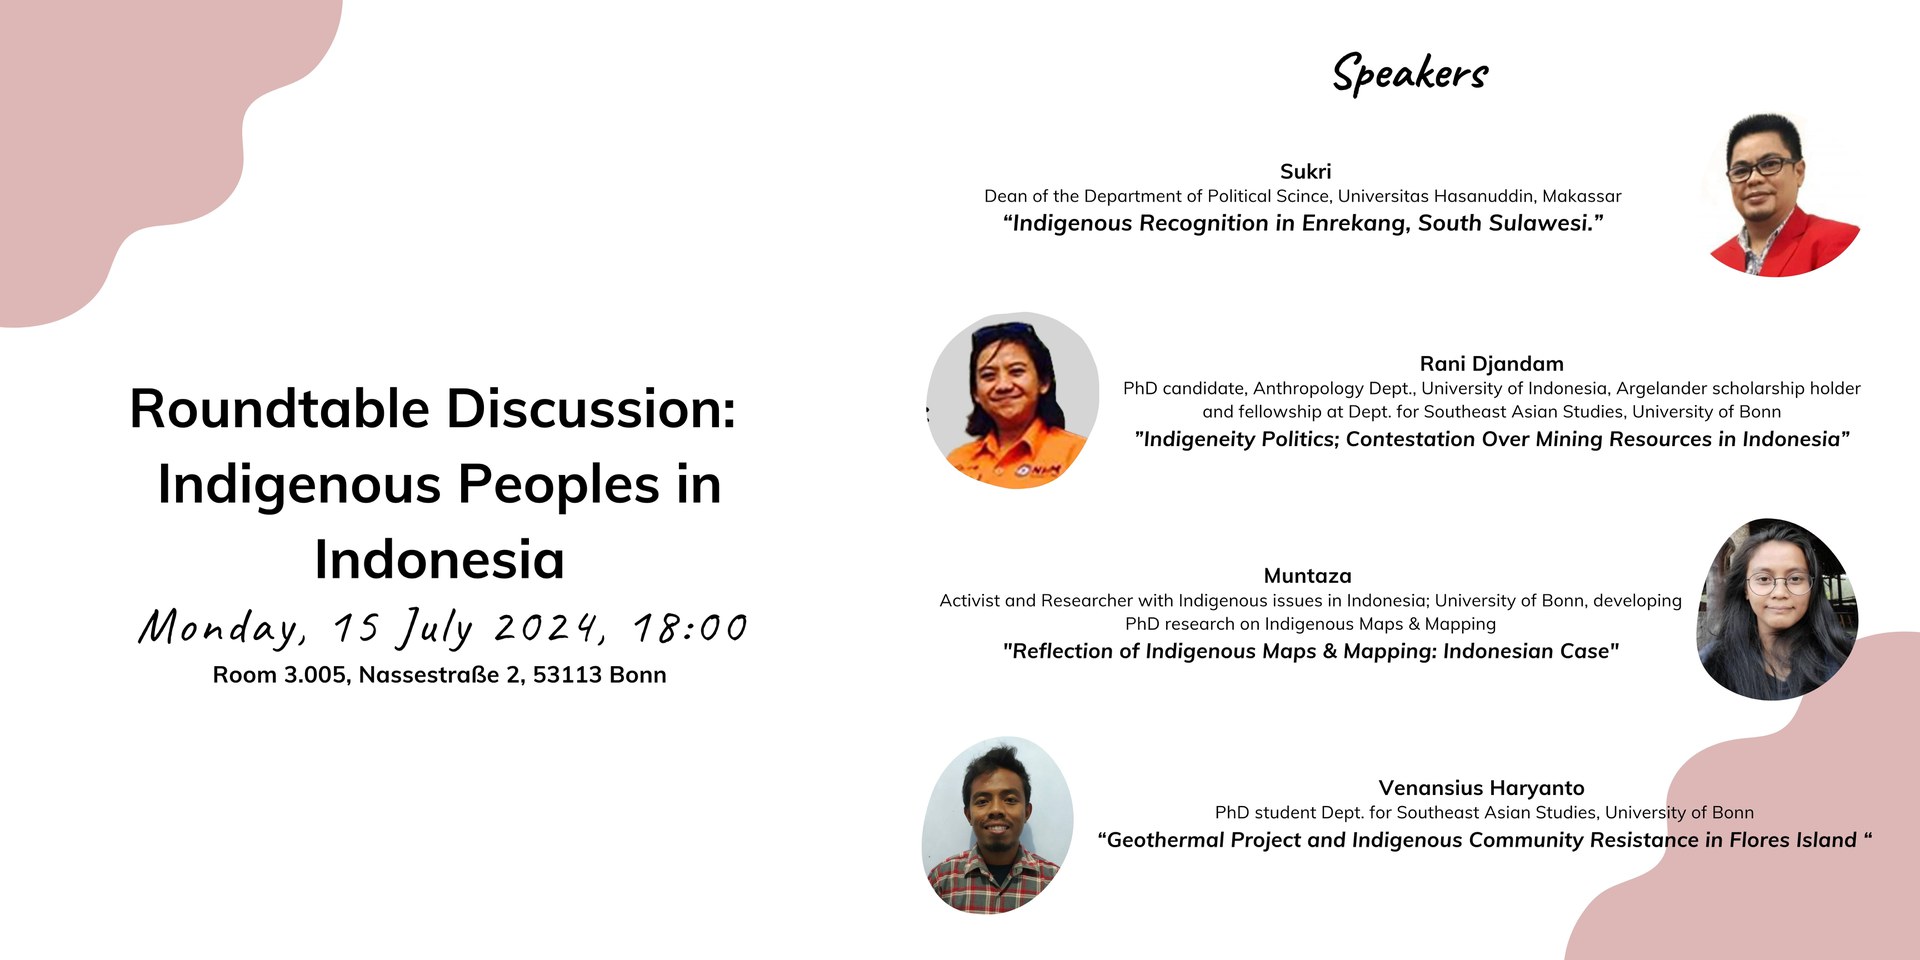 Roundtable Discussion: Indigenous Peoples in Indonesia, 15.07.2024